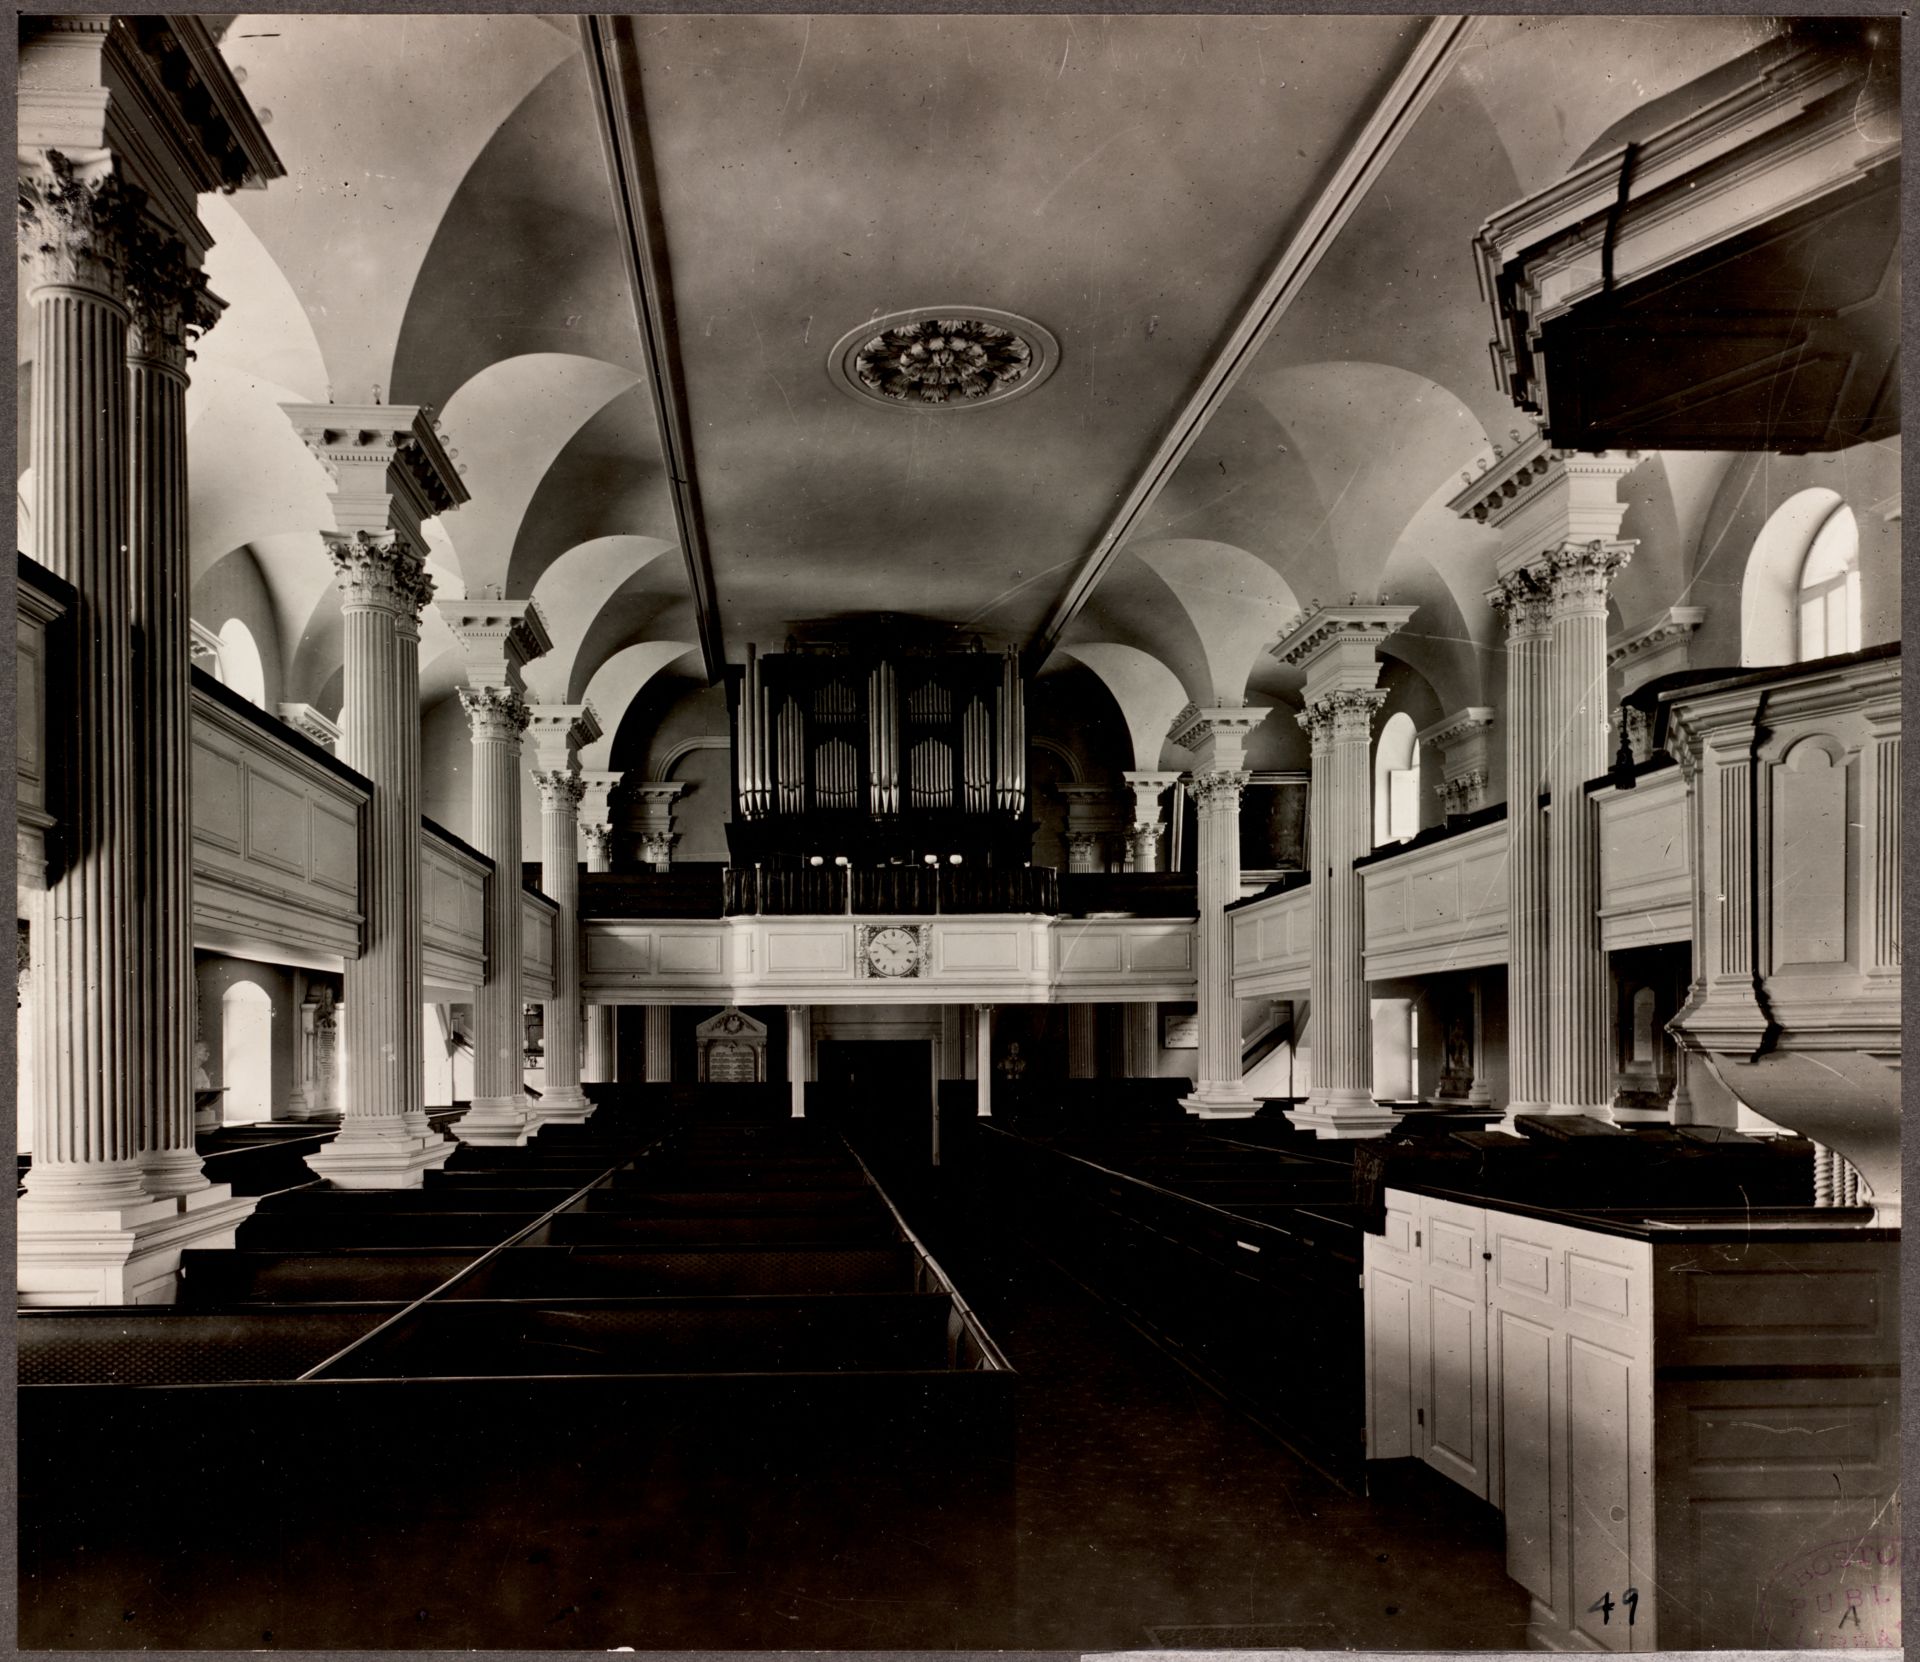 Inside of Chapel, showing first floor and balcony pews, with pipe organ in the far back. 